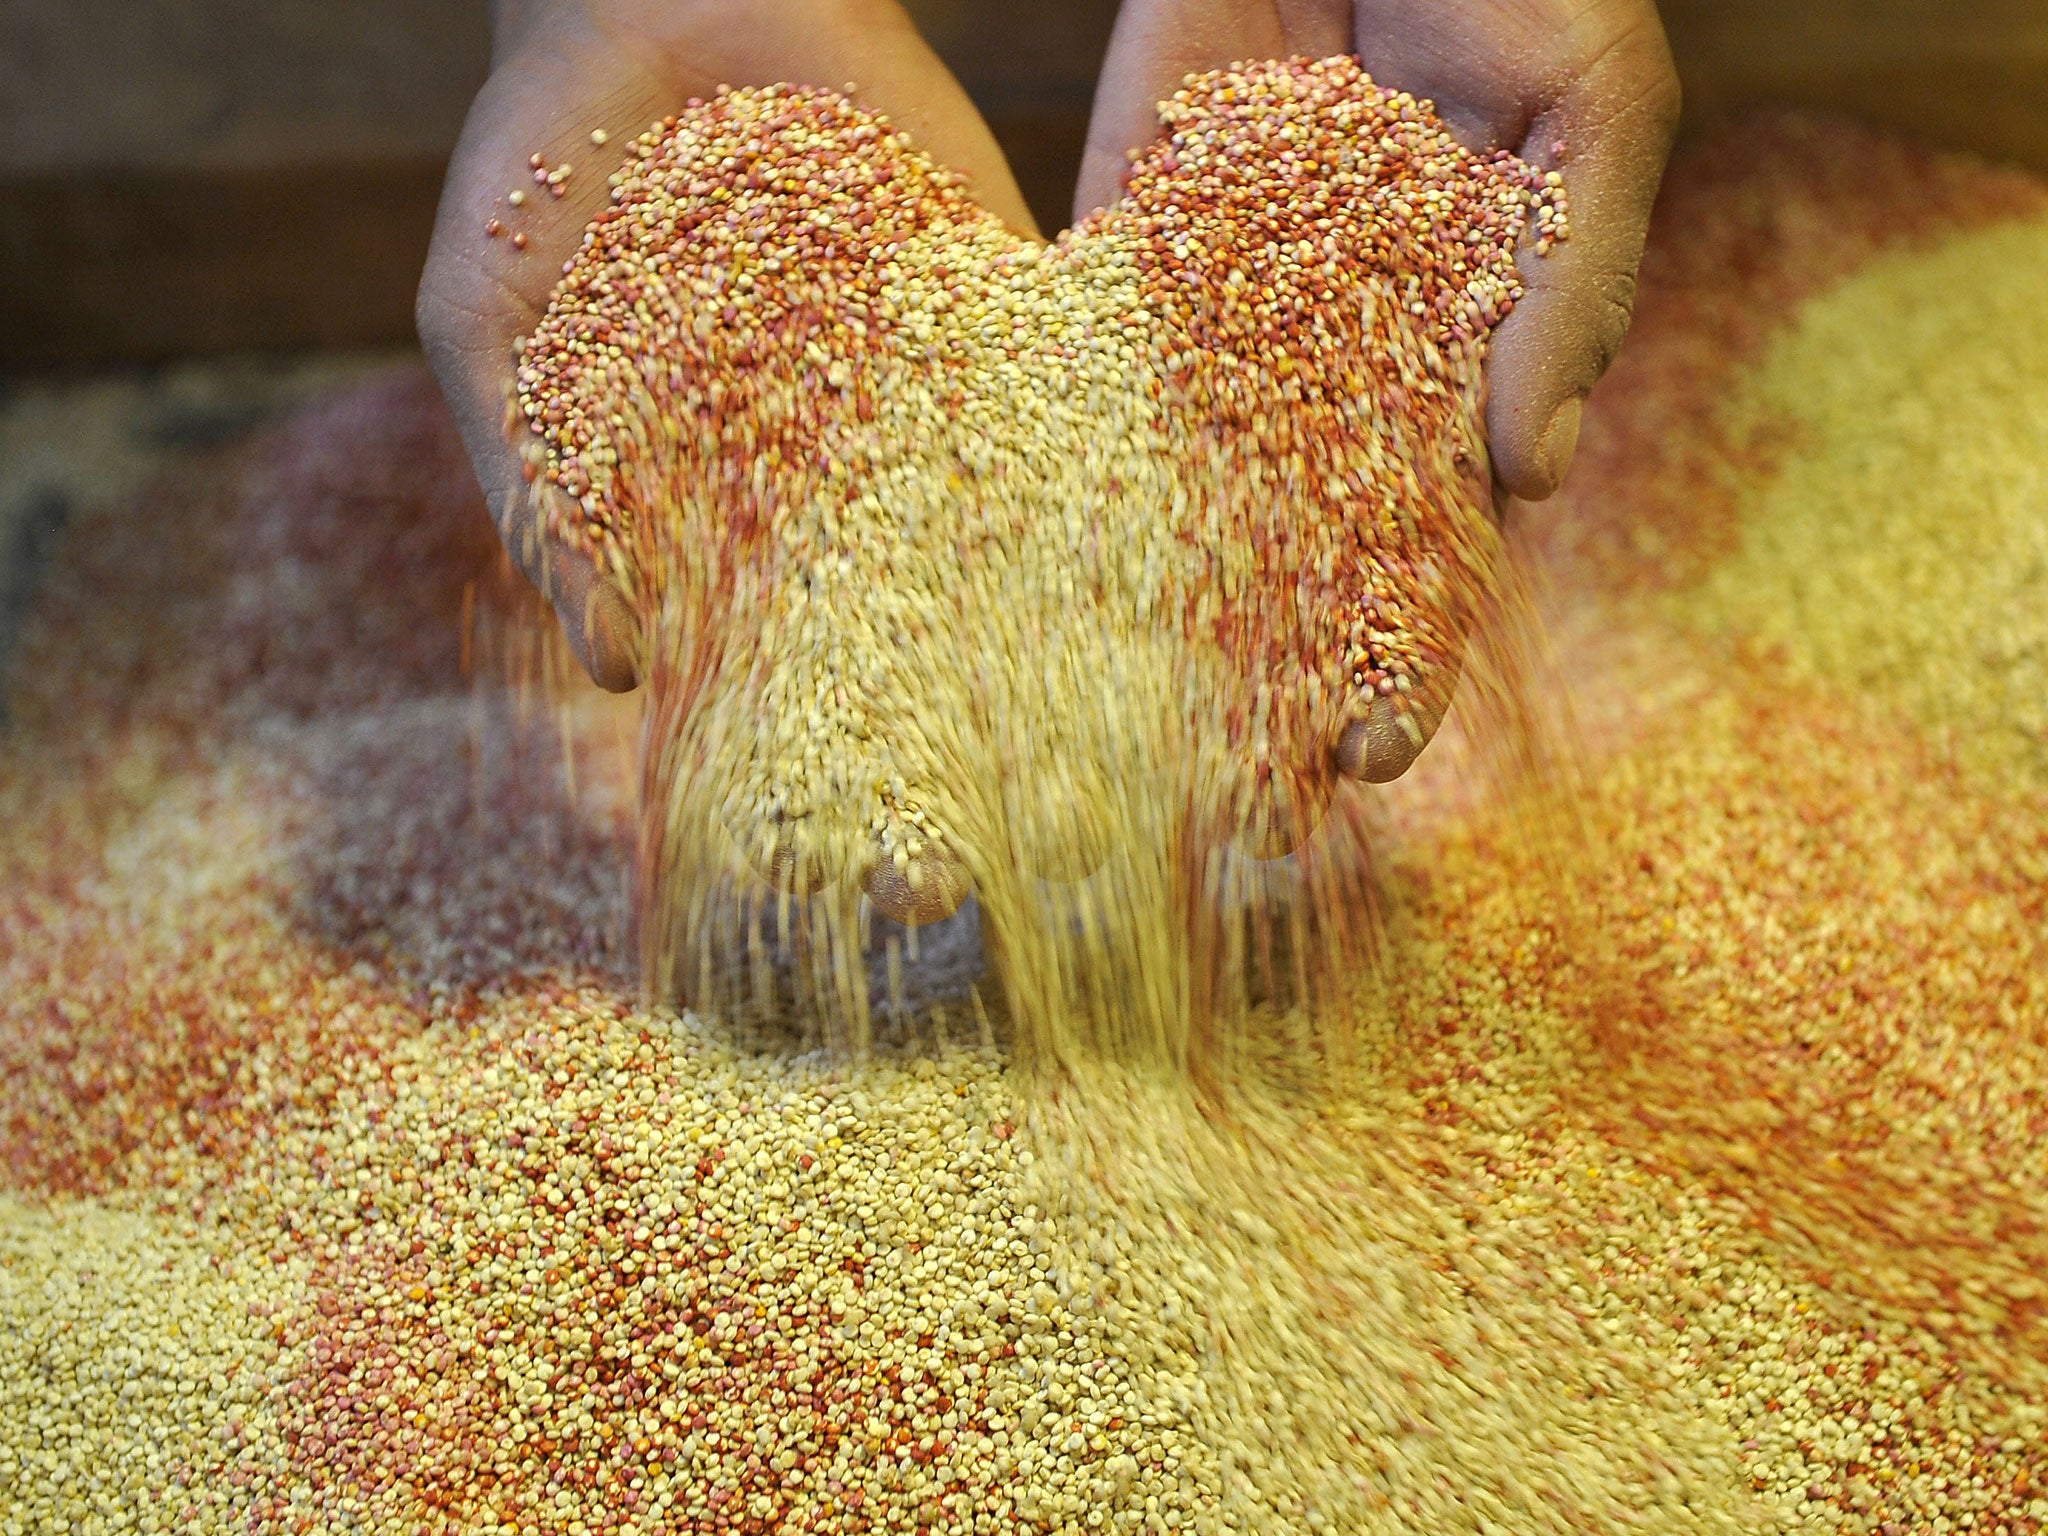 Quinoa has long been praised for its health benefits